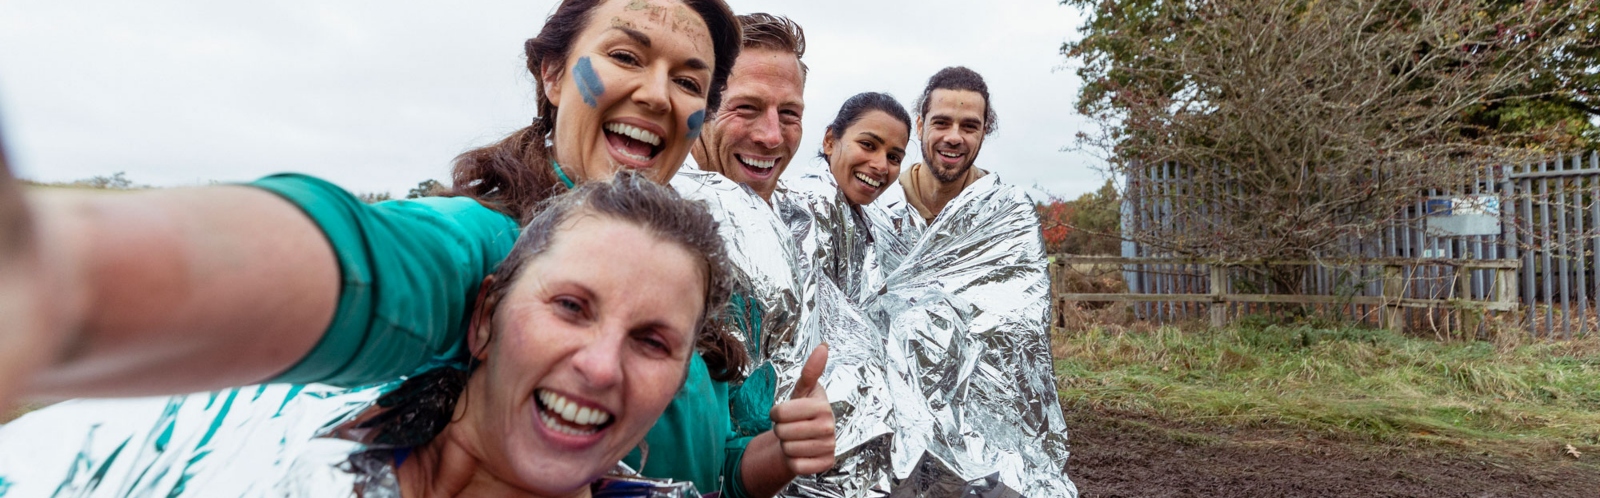 A group of friends wrapped in foil blankets after completing a charity challenge